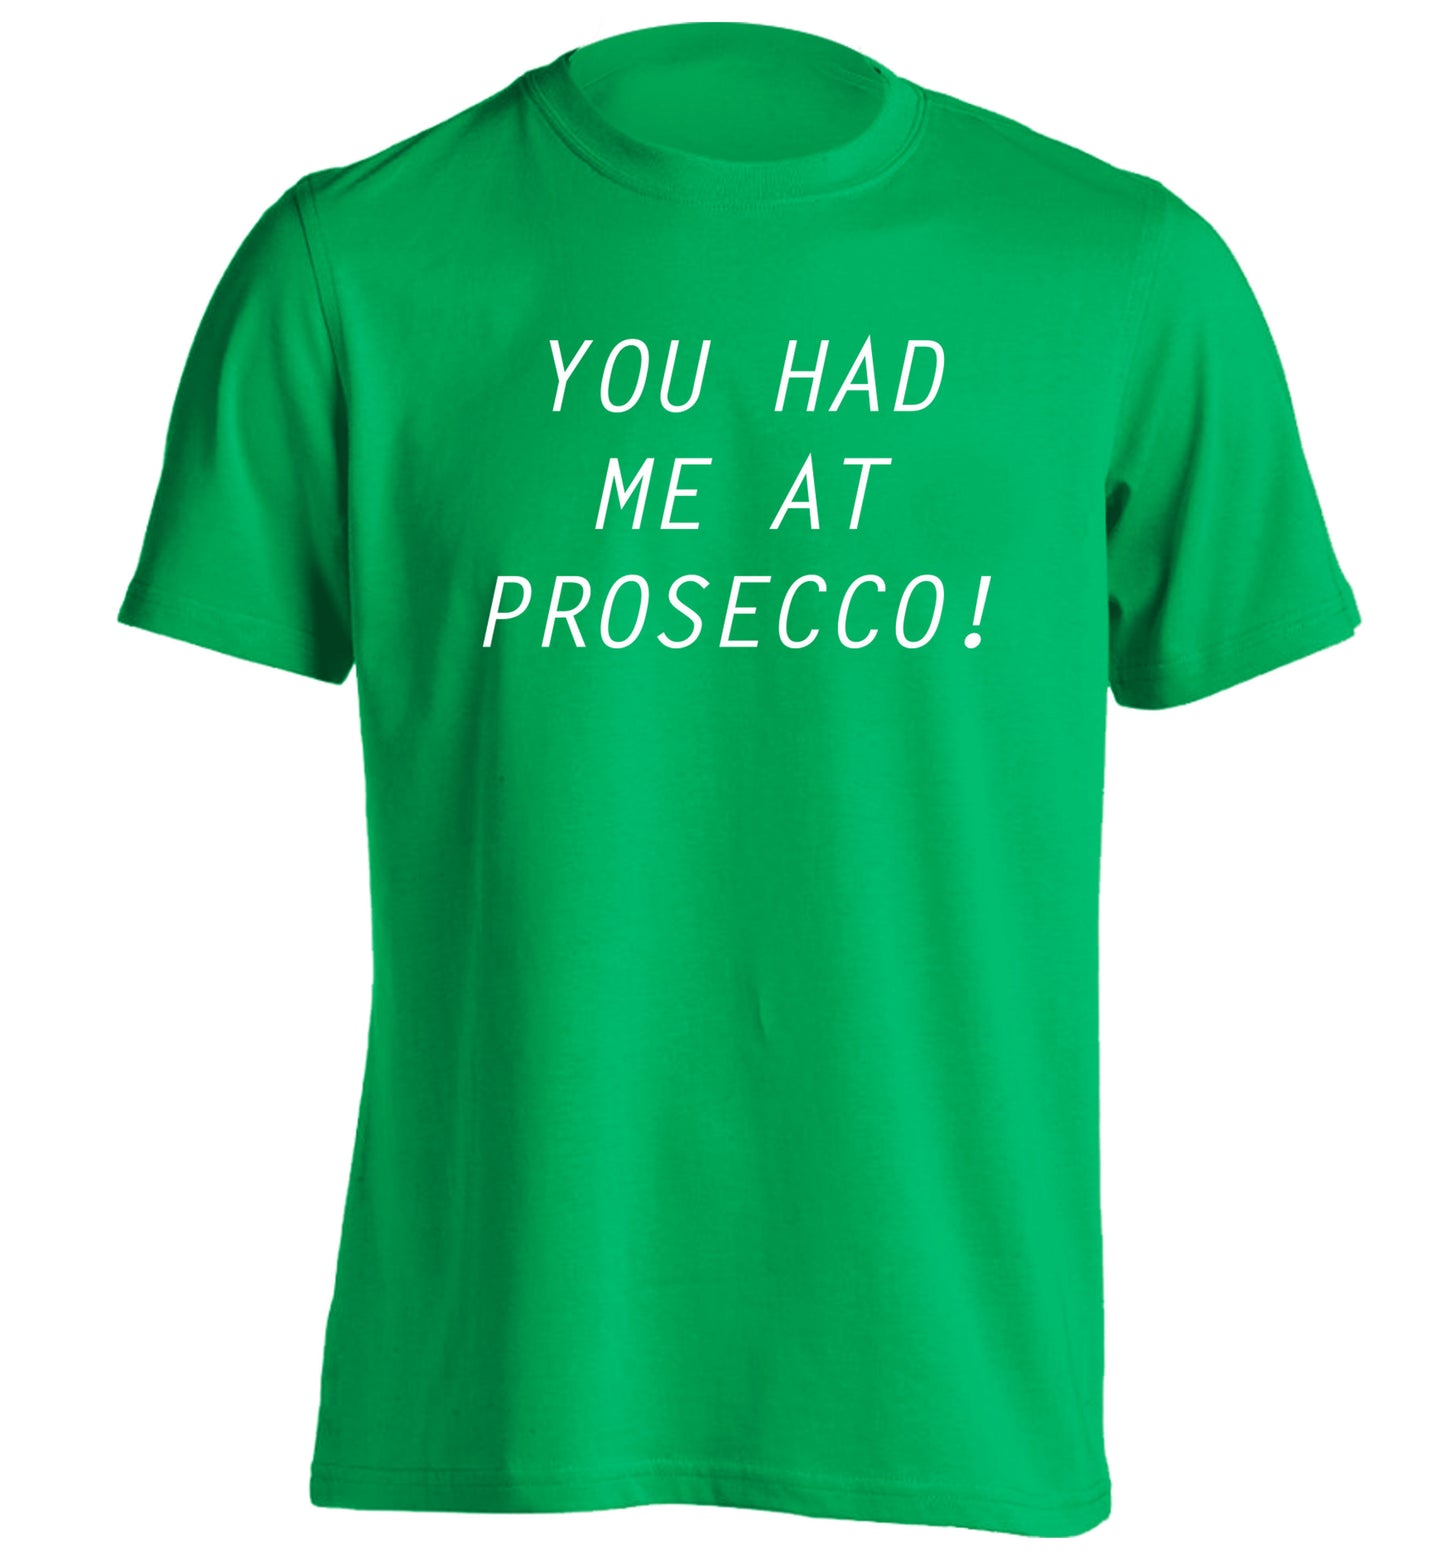 You had me at prosecco adults unisex green Tshirt 2XL